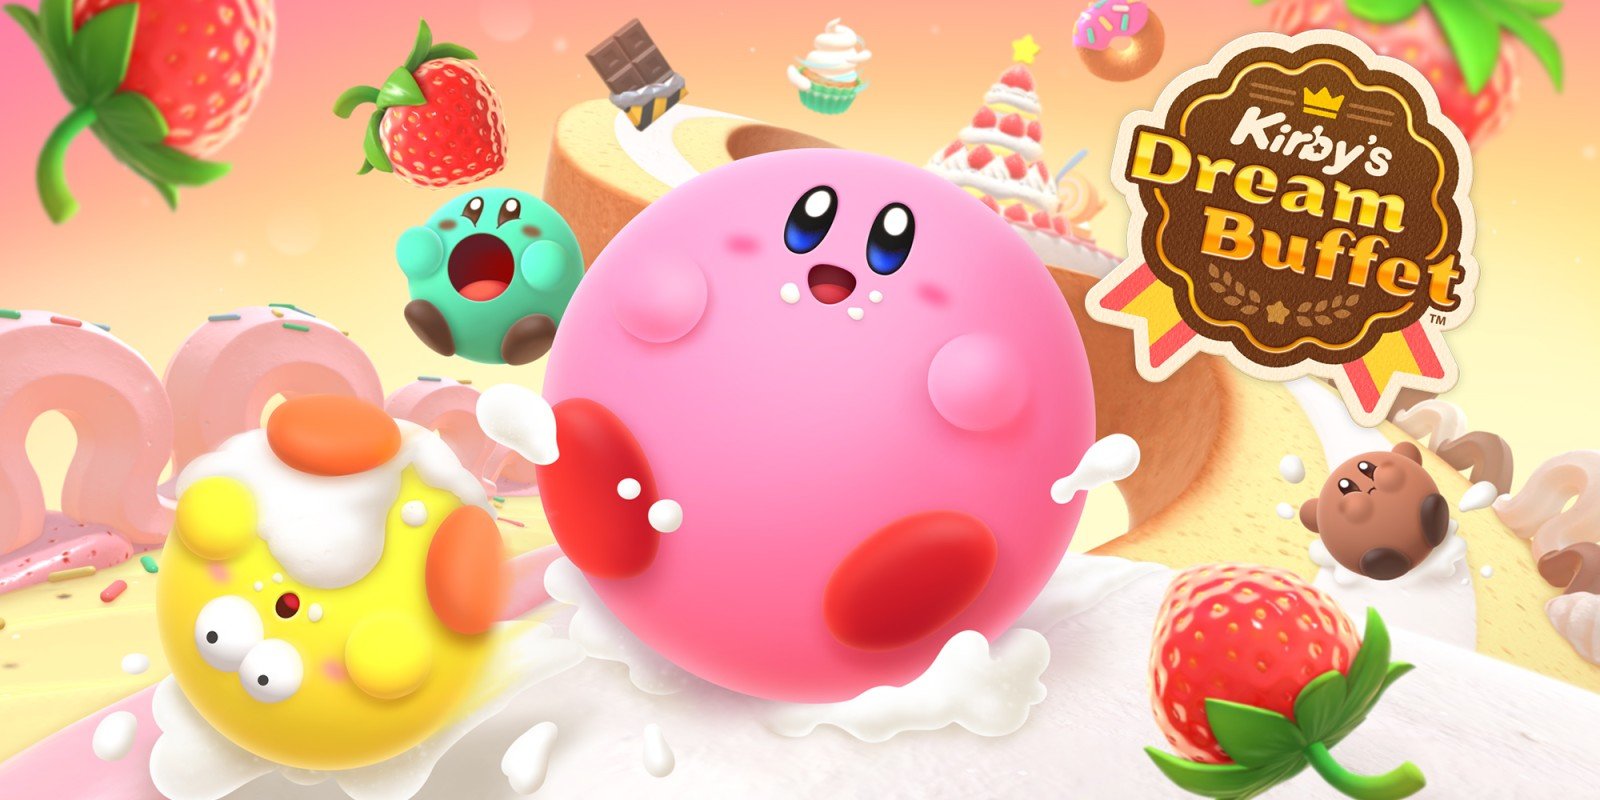 Kirby’s Dream Buffet [Switch] Review – Half Baked?